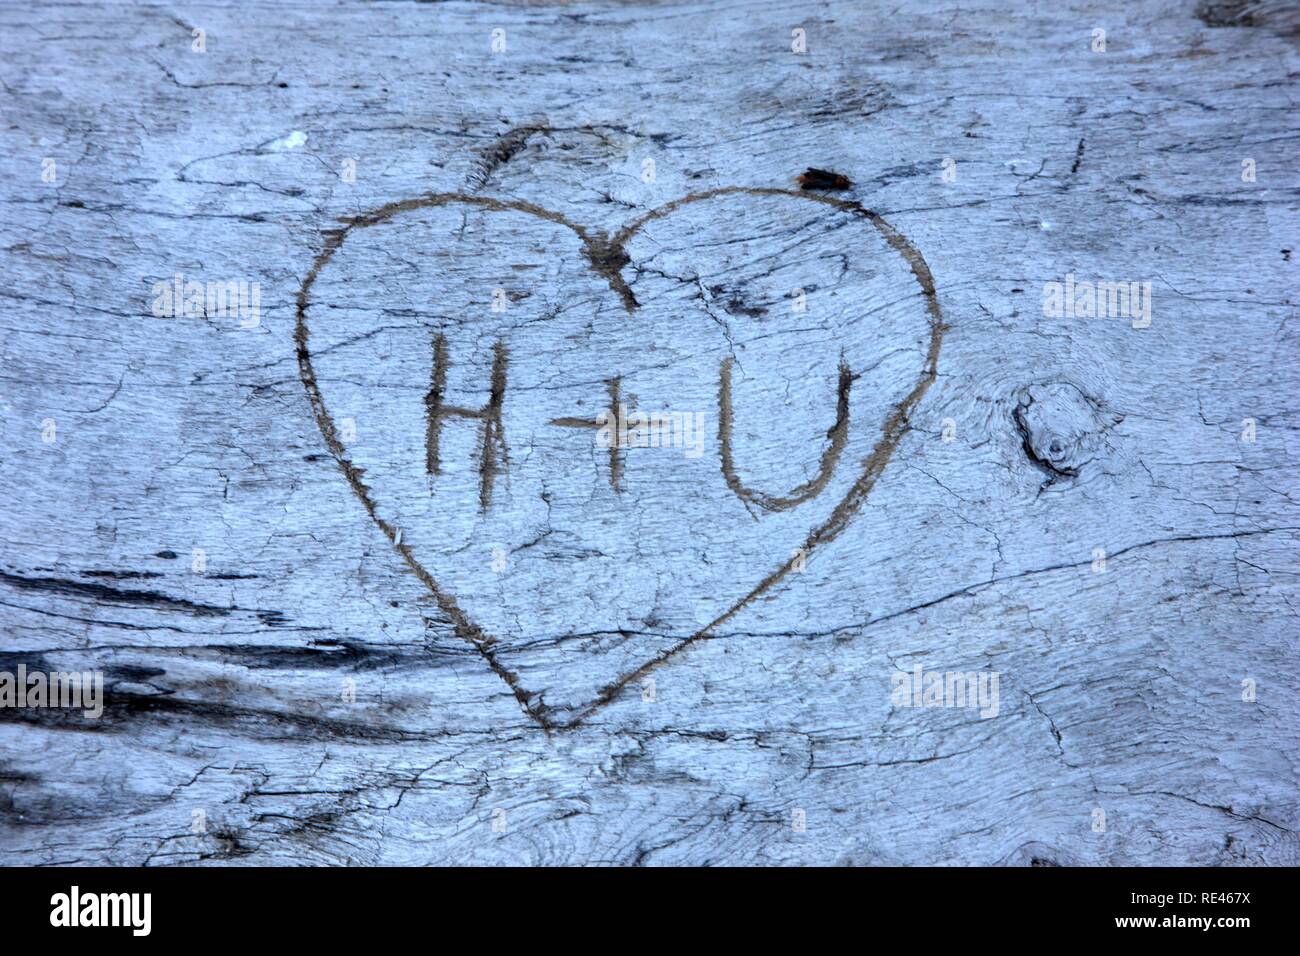 Heart with initials of two lovers, H + U, carved into a tree trunk Stock Photo